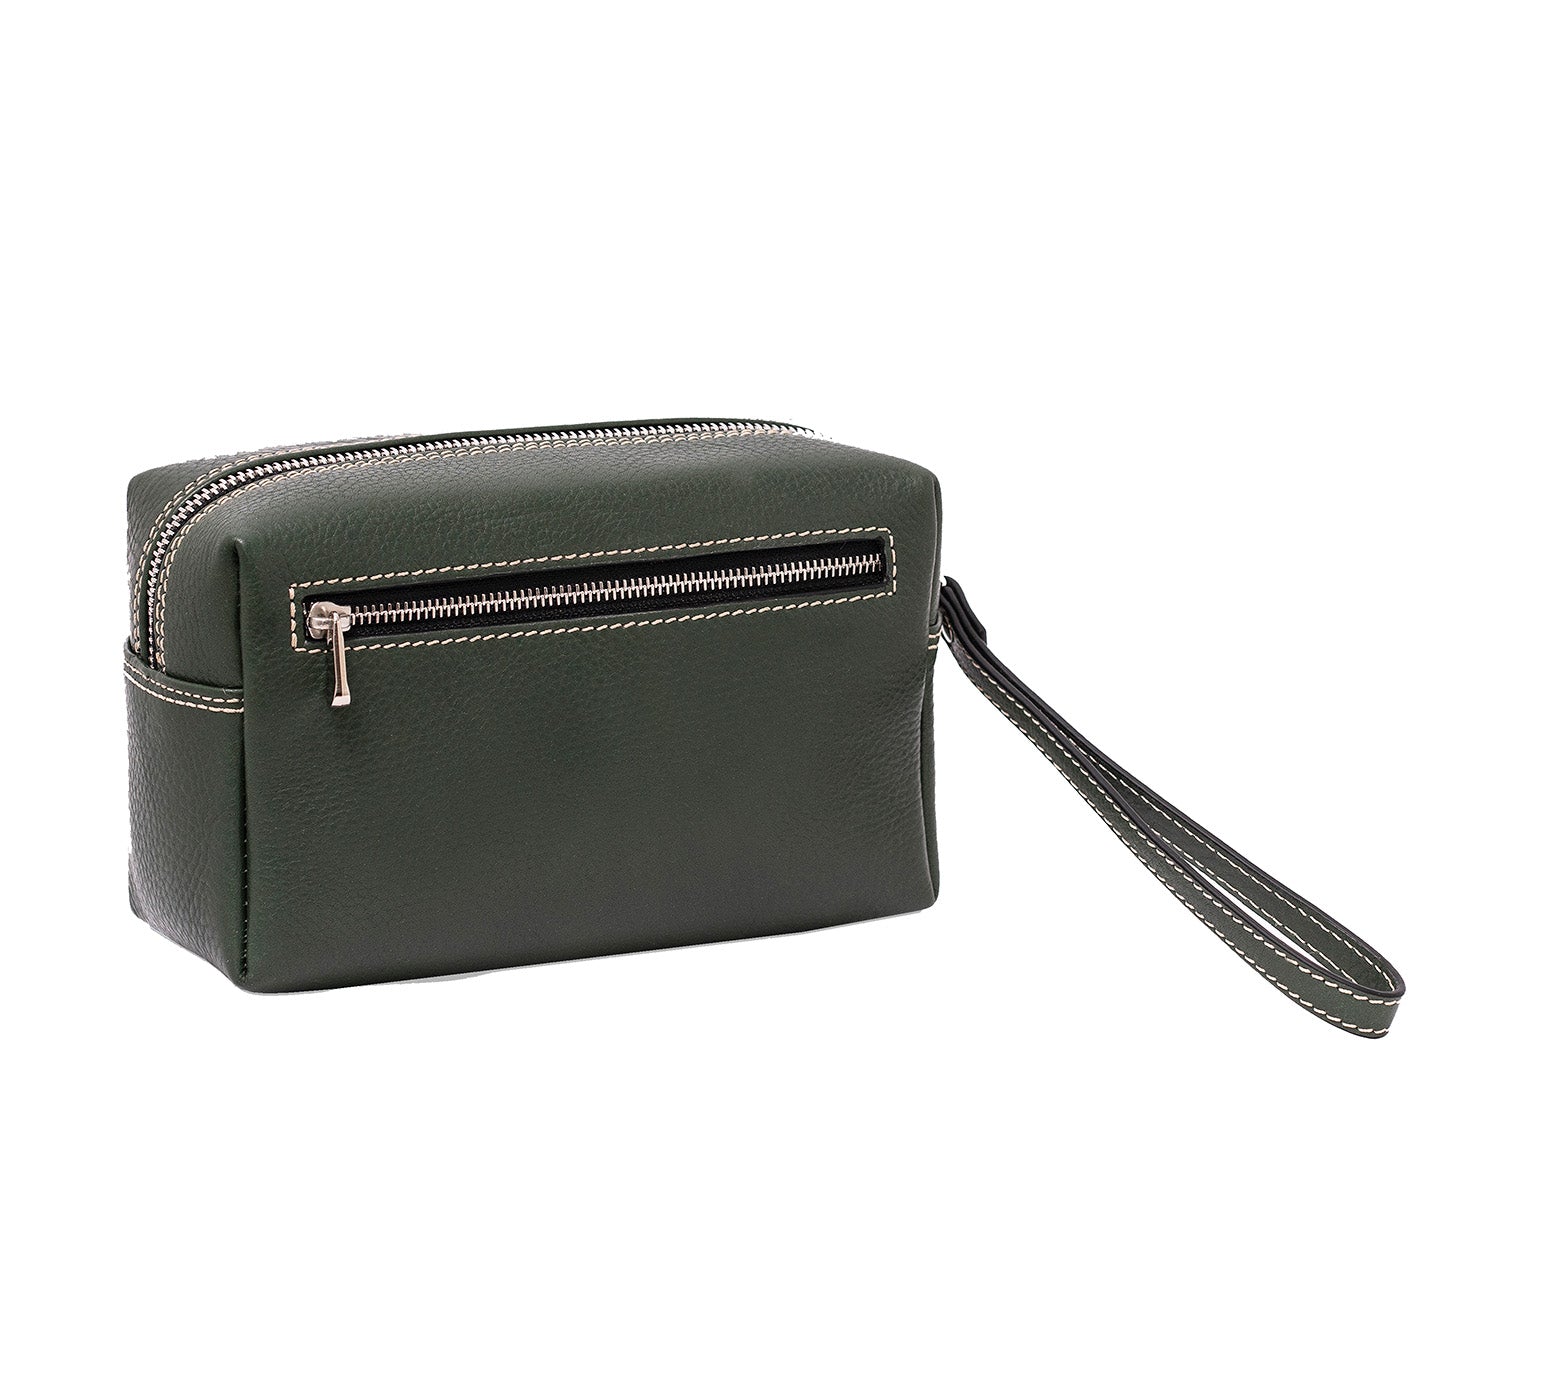 Leather Wrist Bag from Rydal in 'Green' showing reverse. 